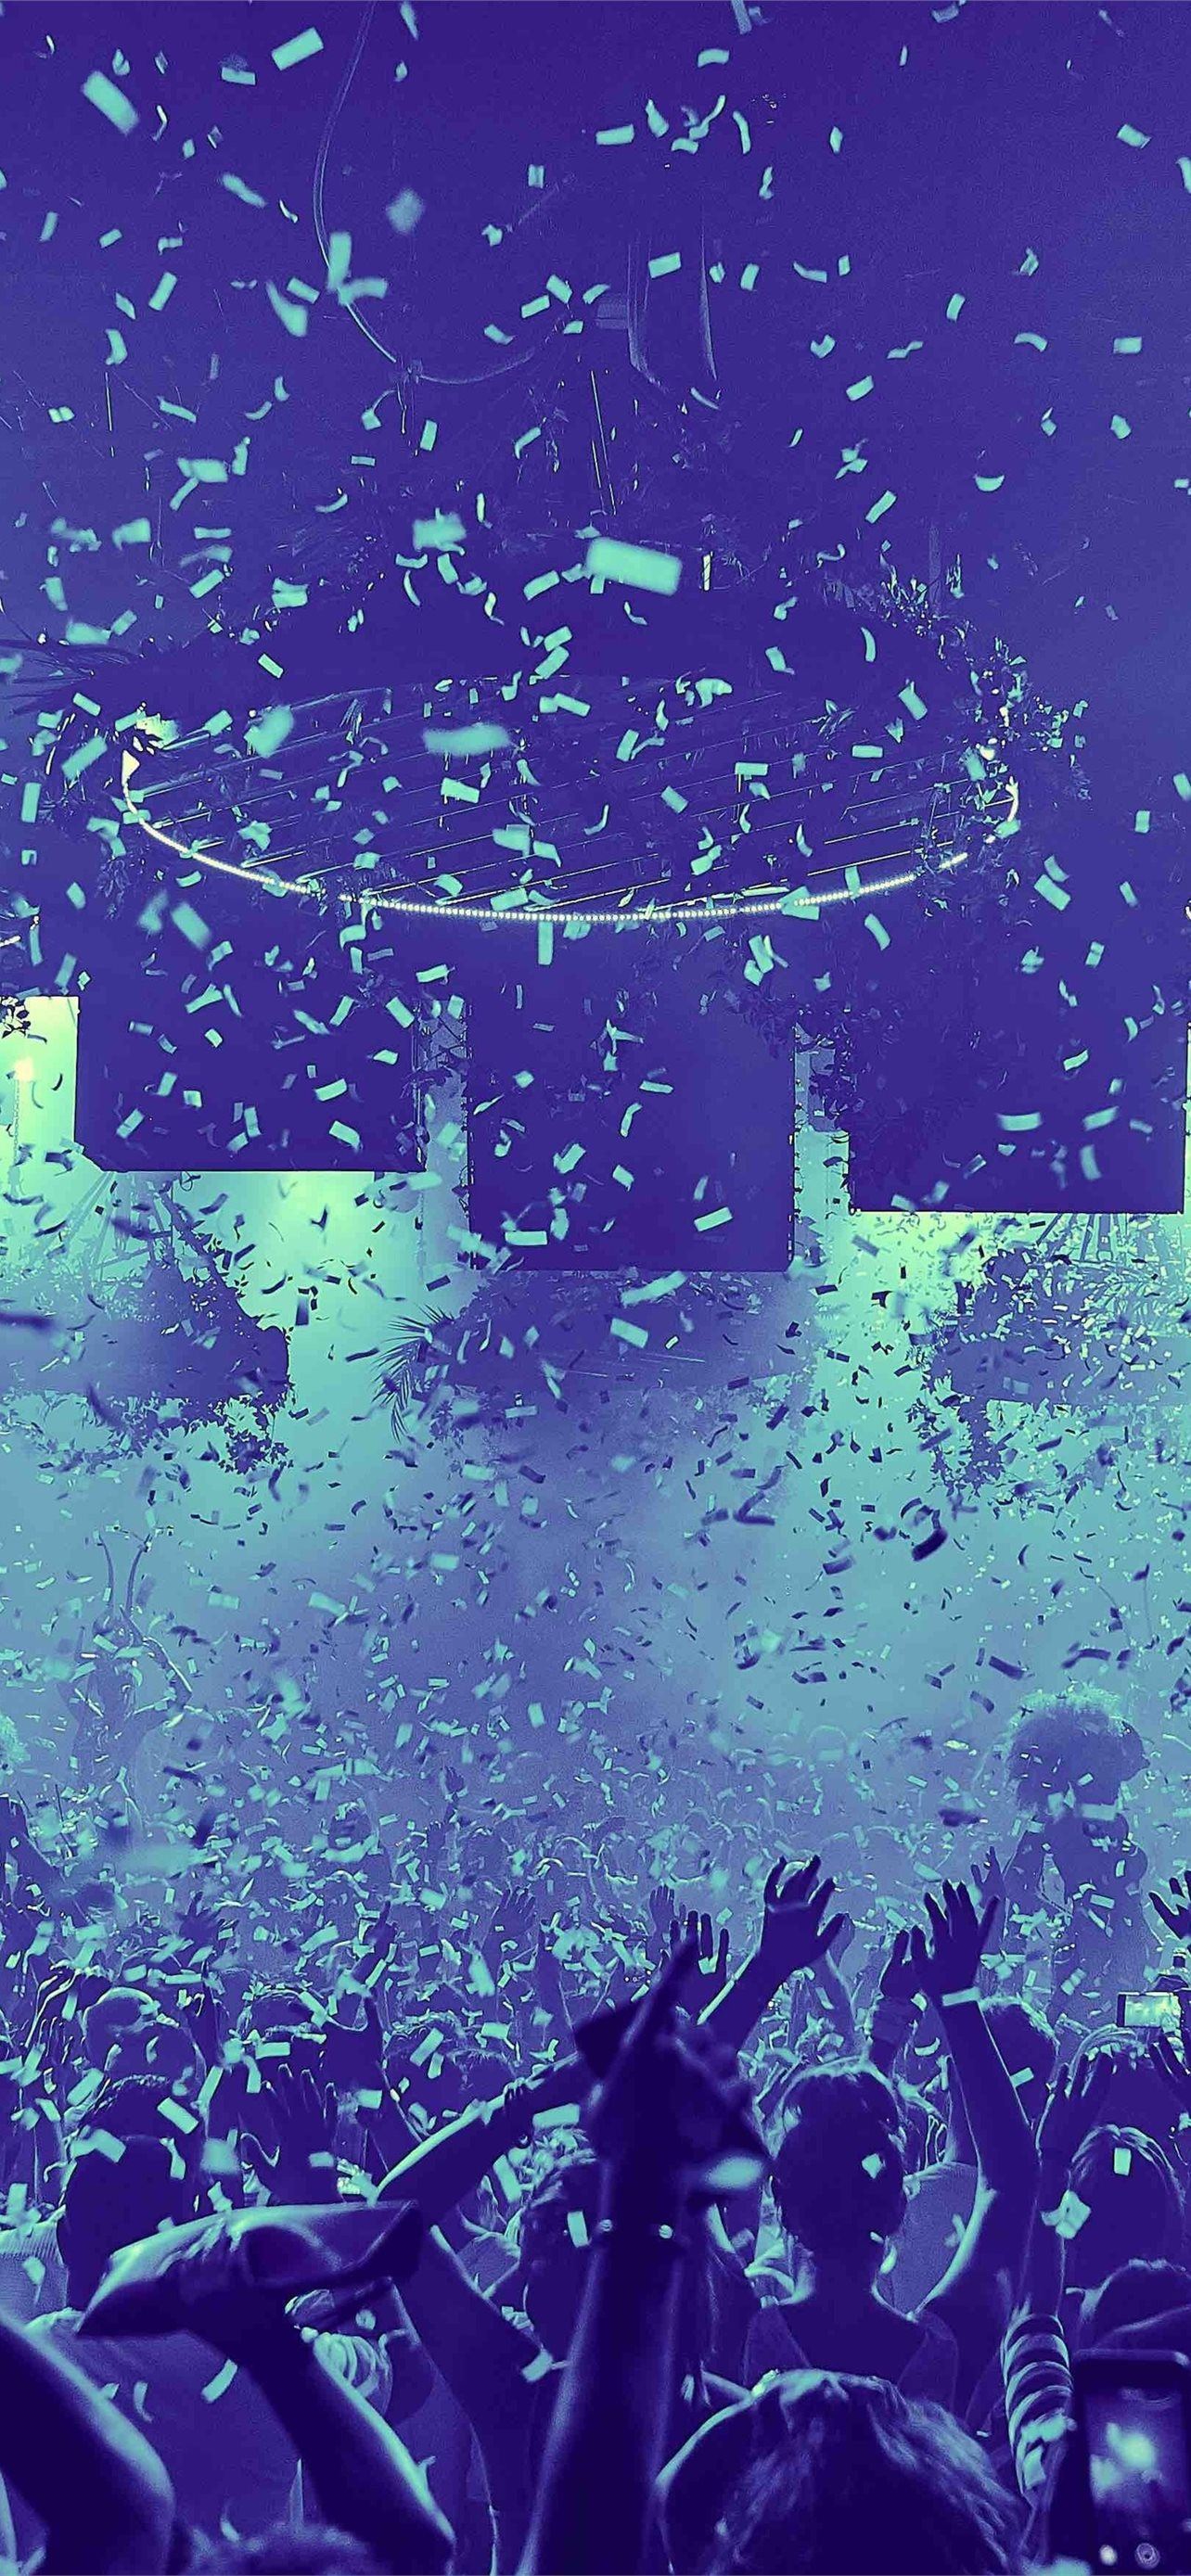 Confetti falling from the ceiling at a concert - Indigo